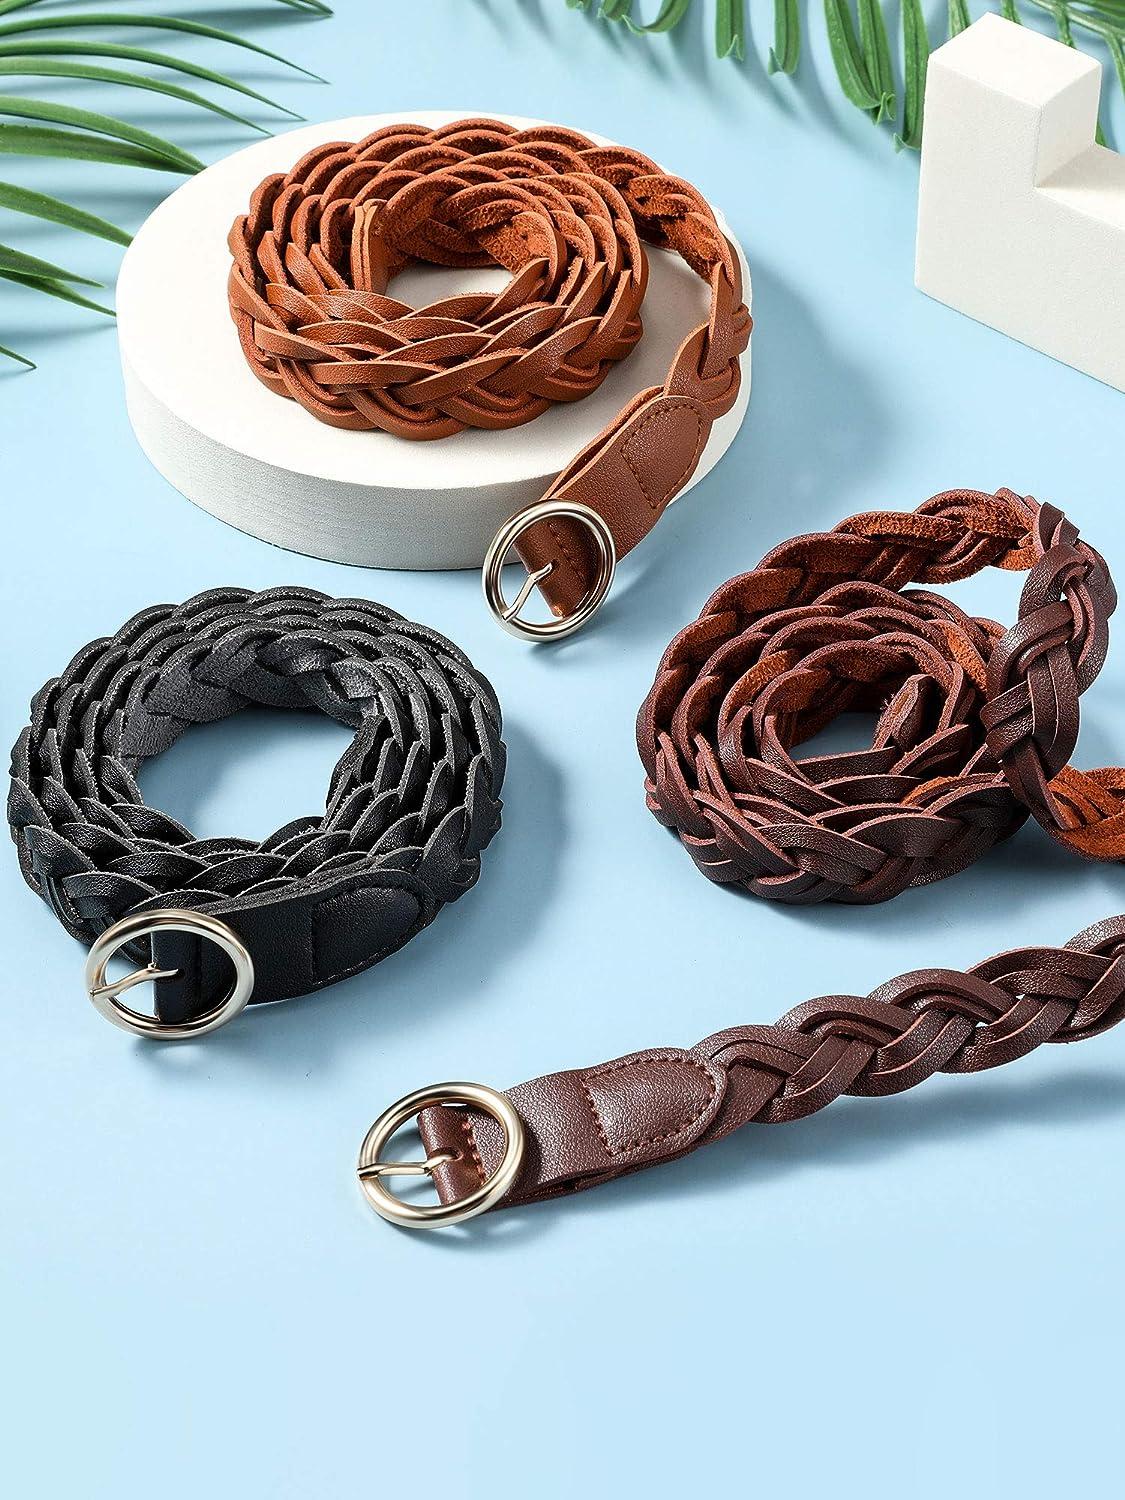 ByTheR Fashion Thin Braided Leather Belt For Dress with Buckle 30mm